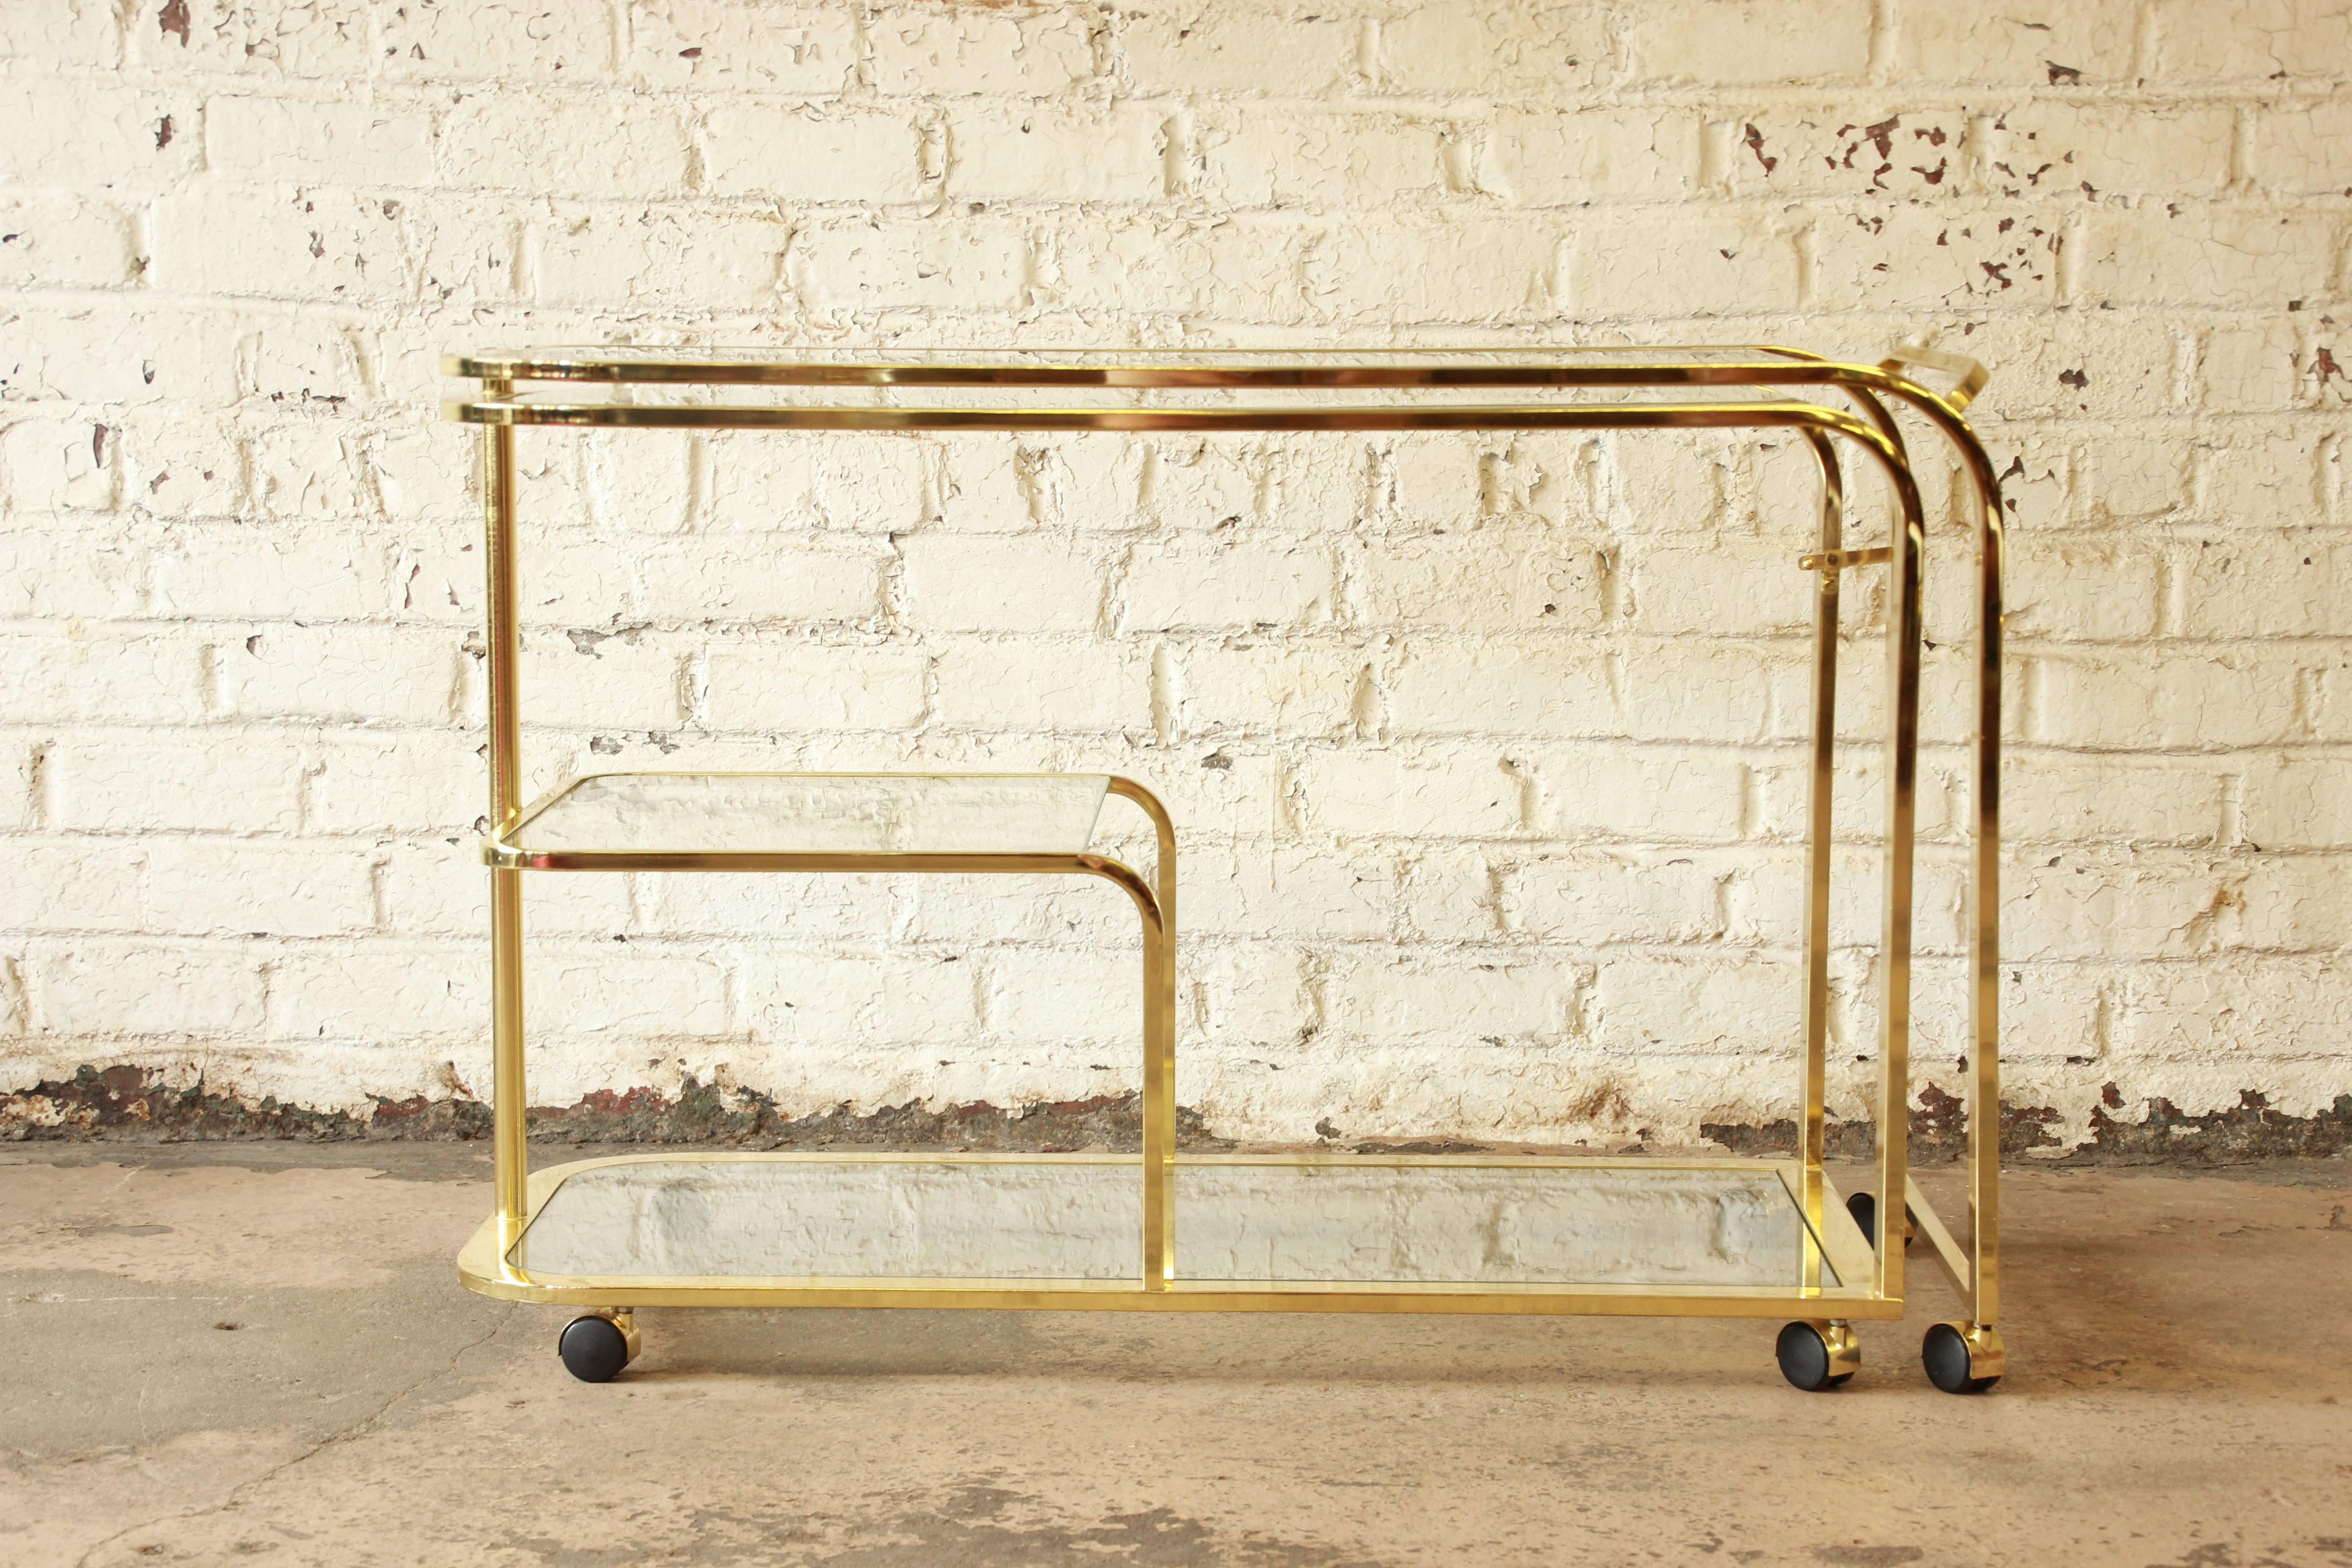 An exceptional 1970s Hollywood Regency brass and glass bar or tea cart by Design Institute of America. In the style of Milo Baughman. The three-tier cart uniquely expands into an L-shape or long bar and is 87